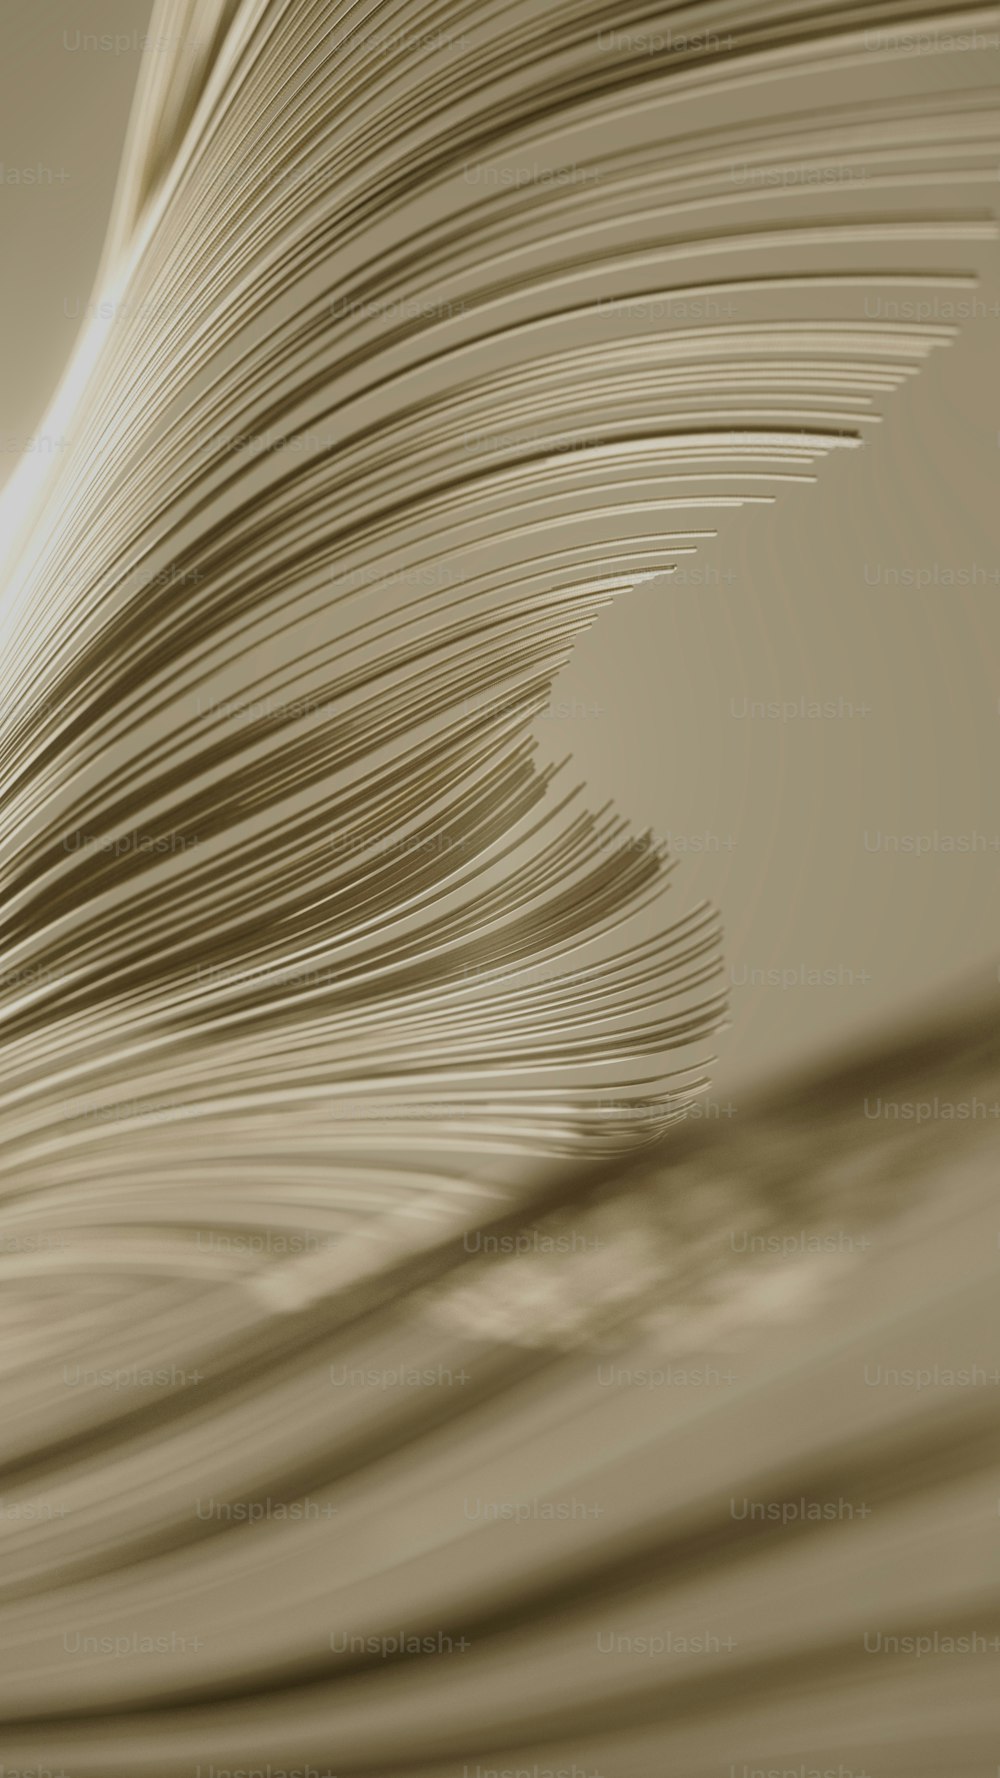 a close up of a book with a blurry background